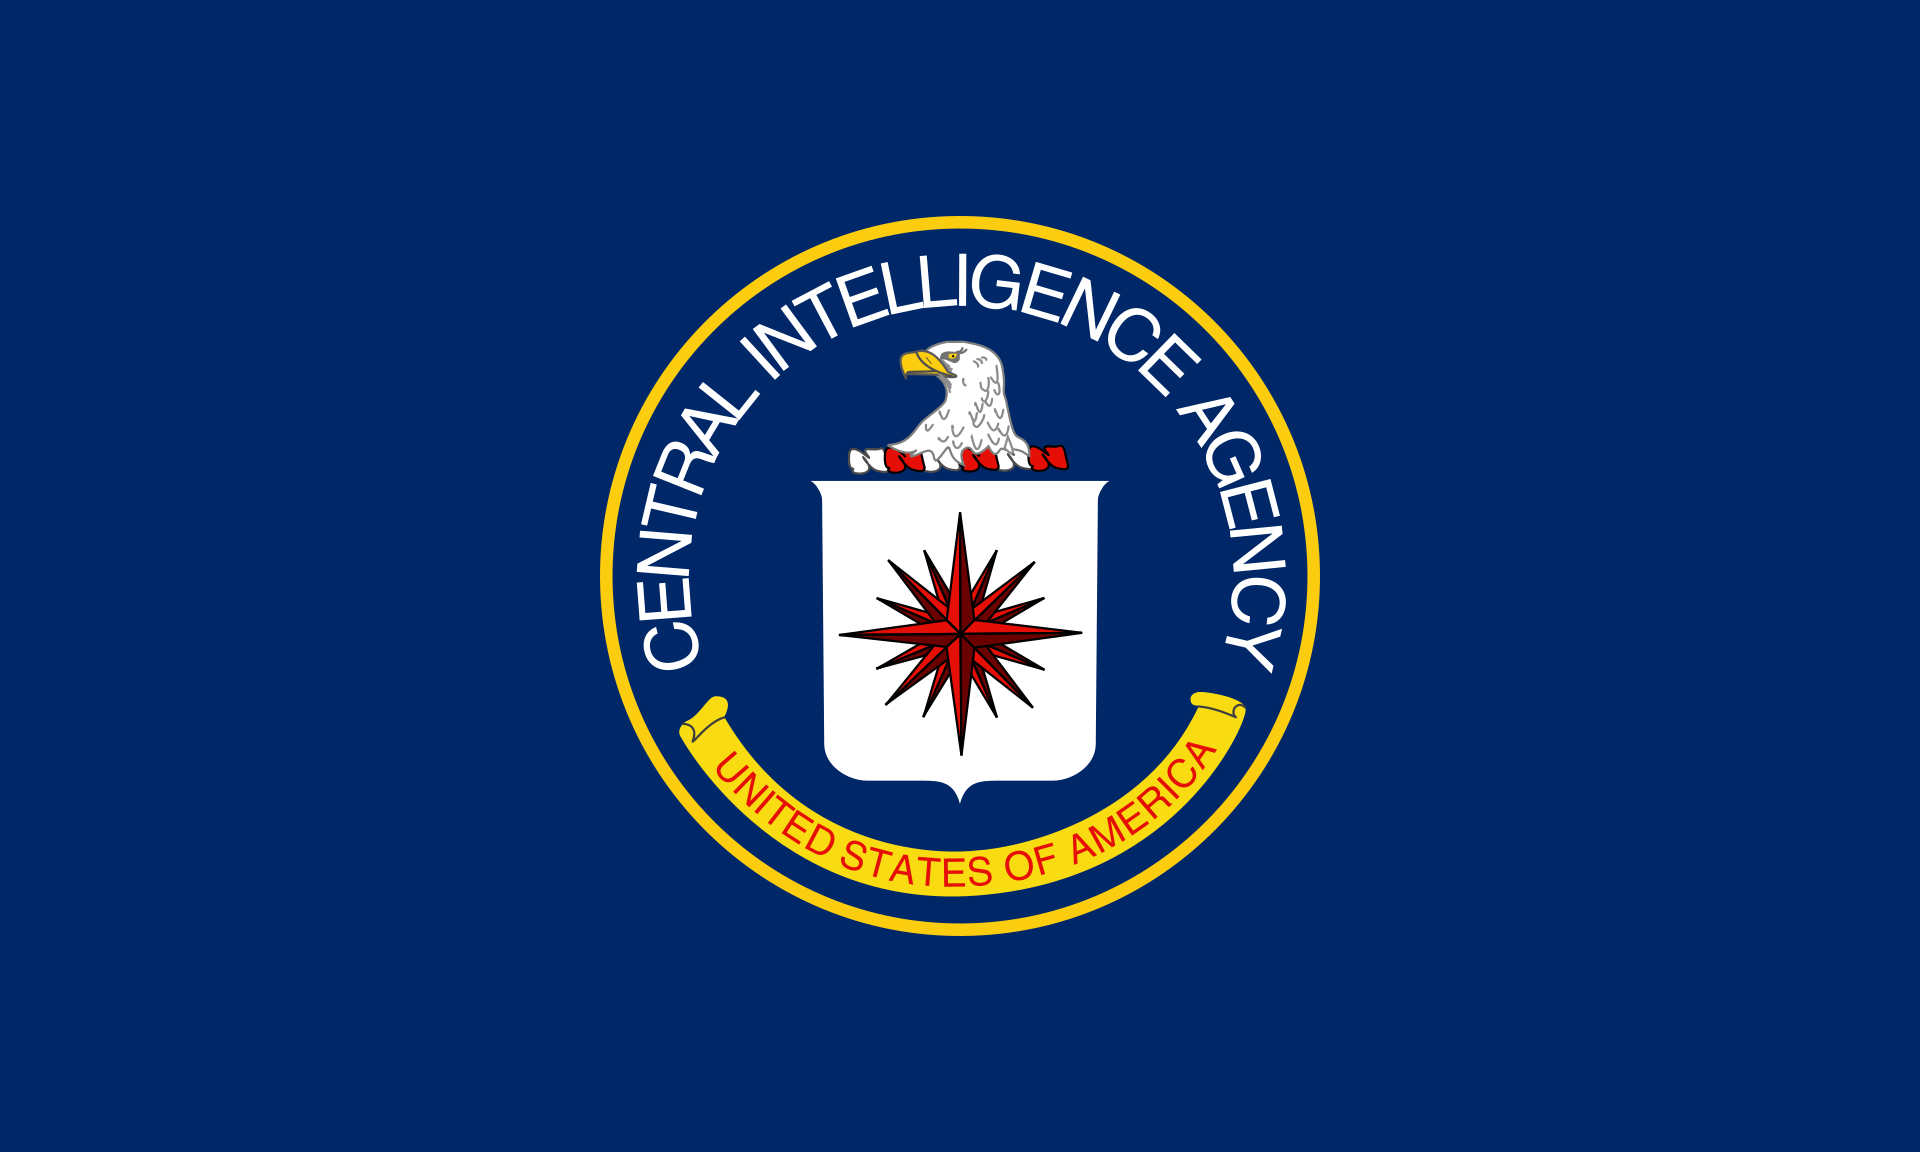 Looking for a Job in XR? The CIA is Hiring